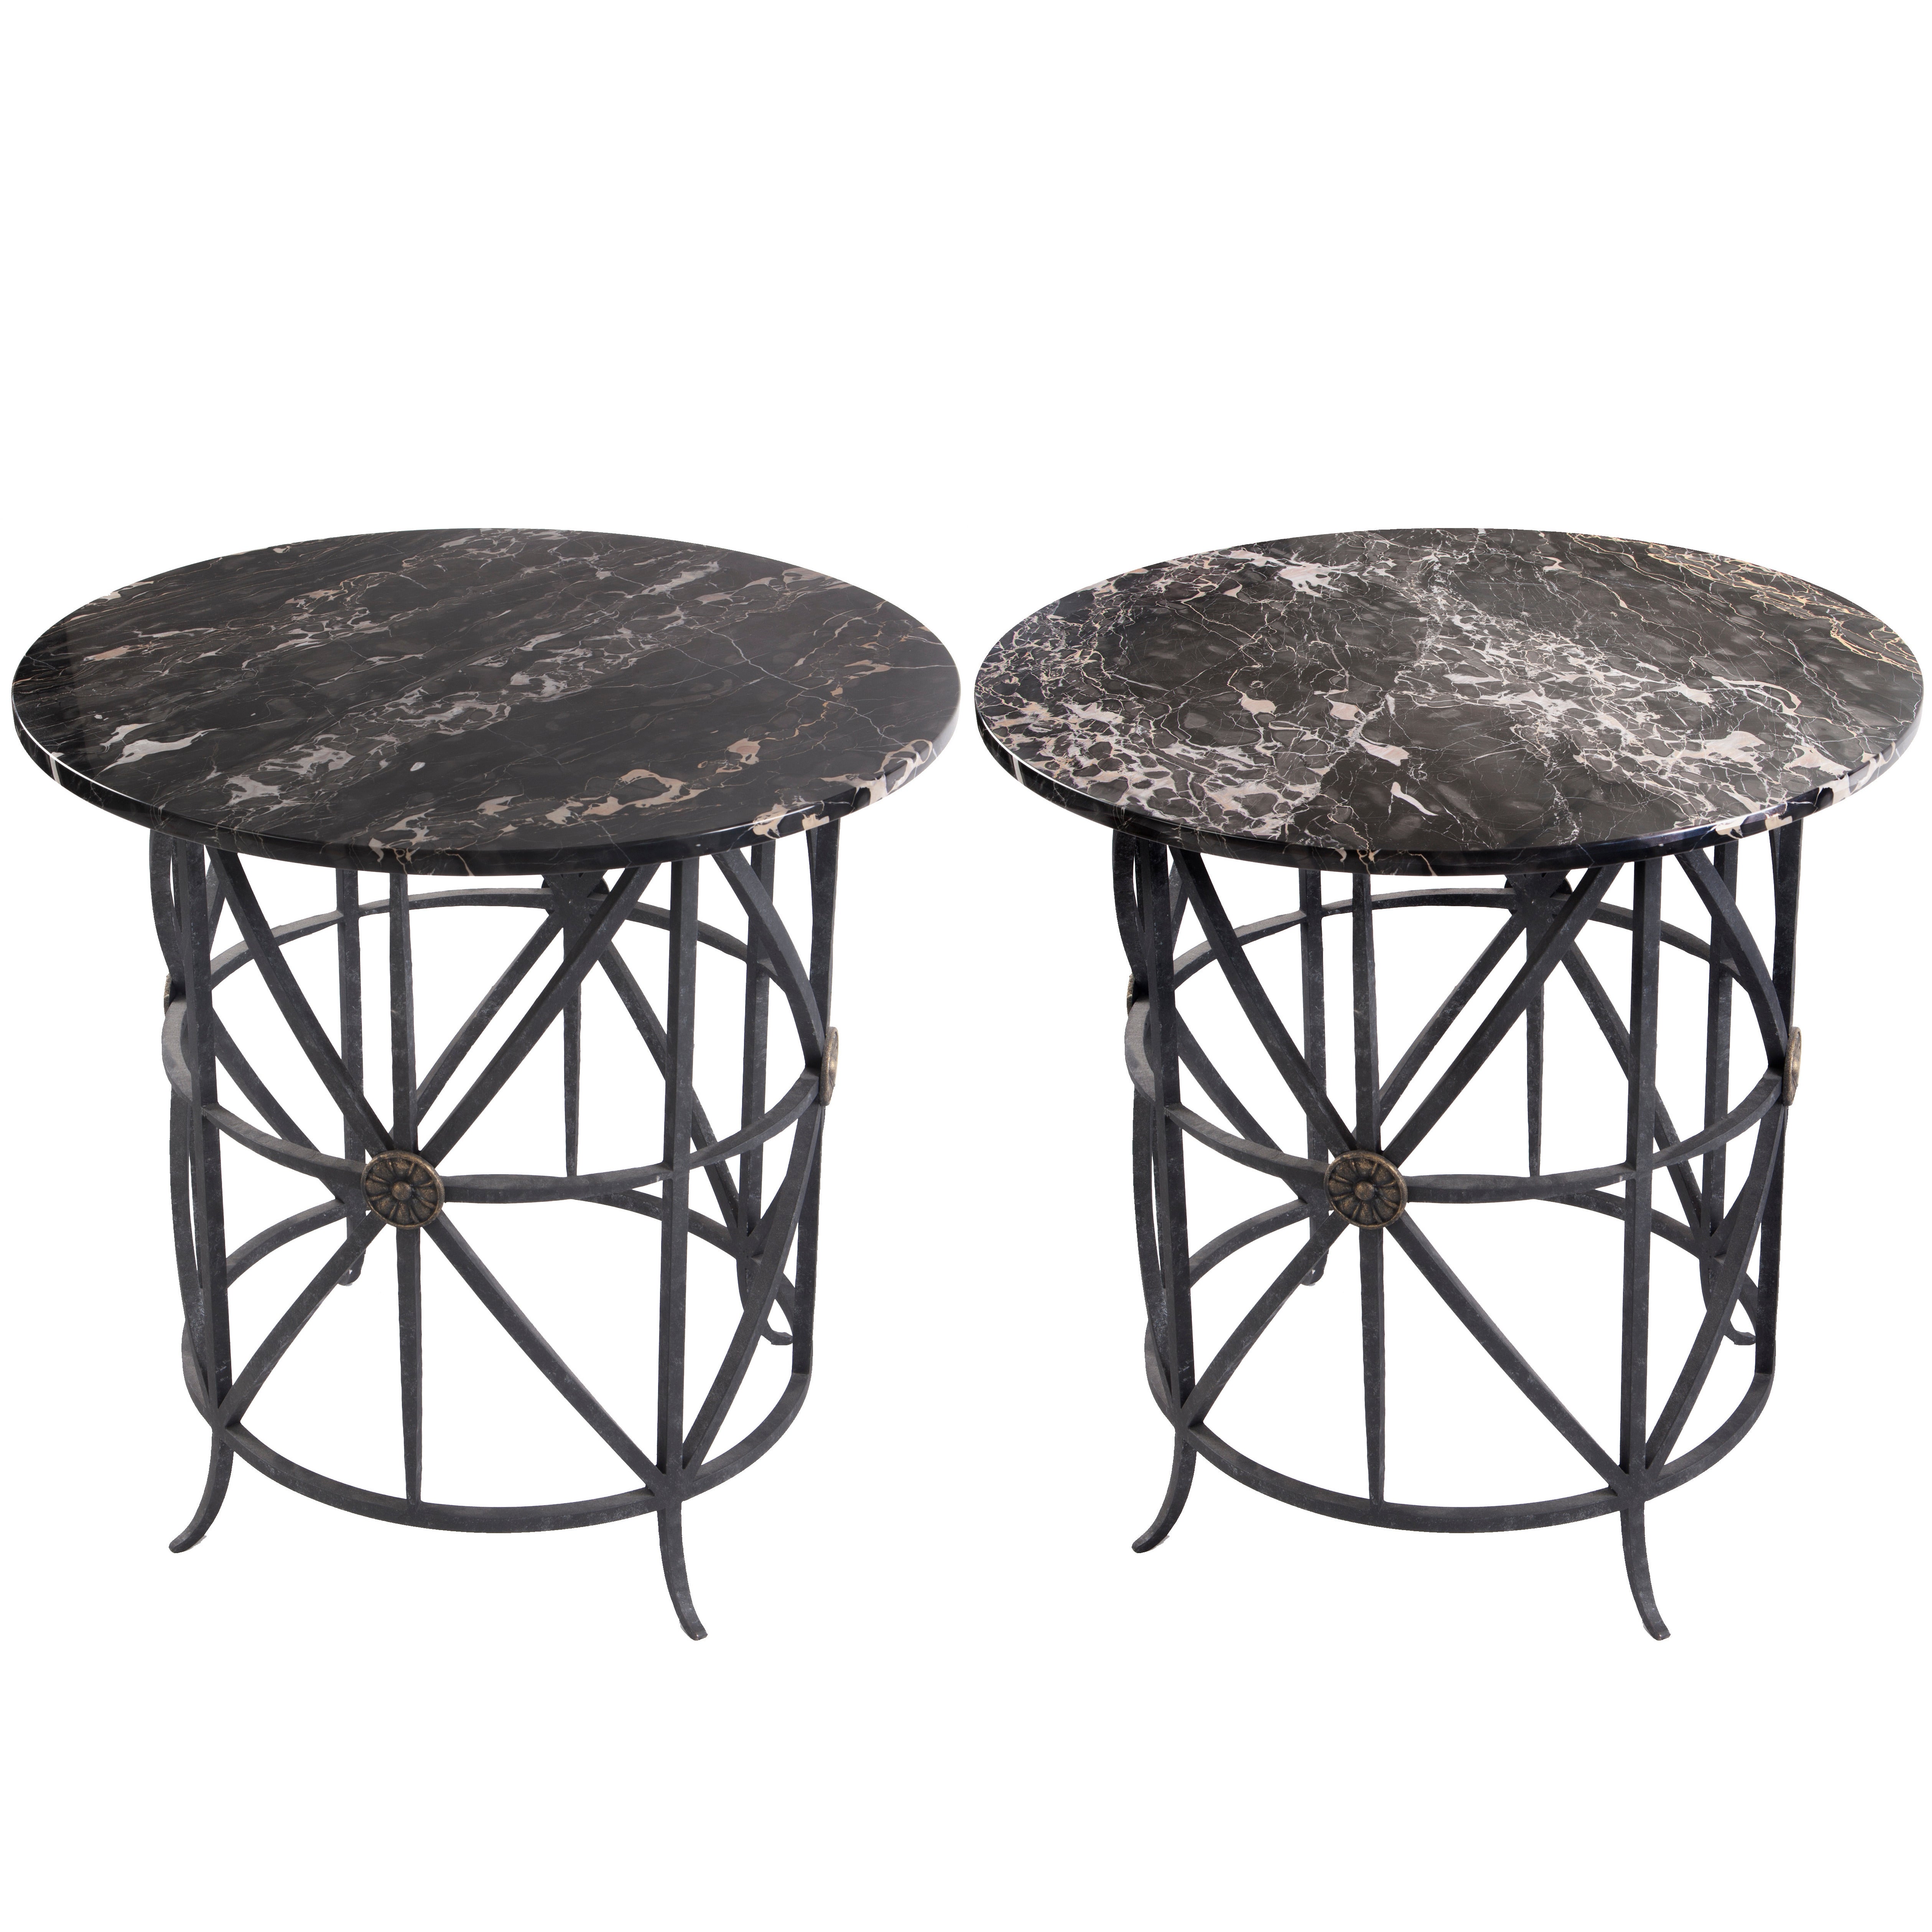 Pair of Midcentury Round Wrought Iron Marble Tables